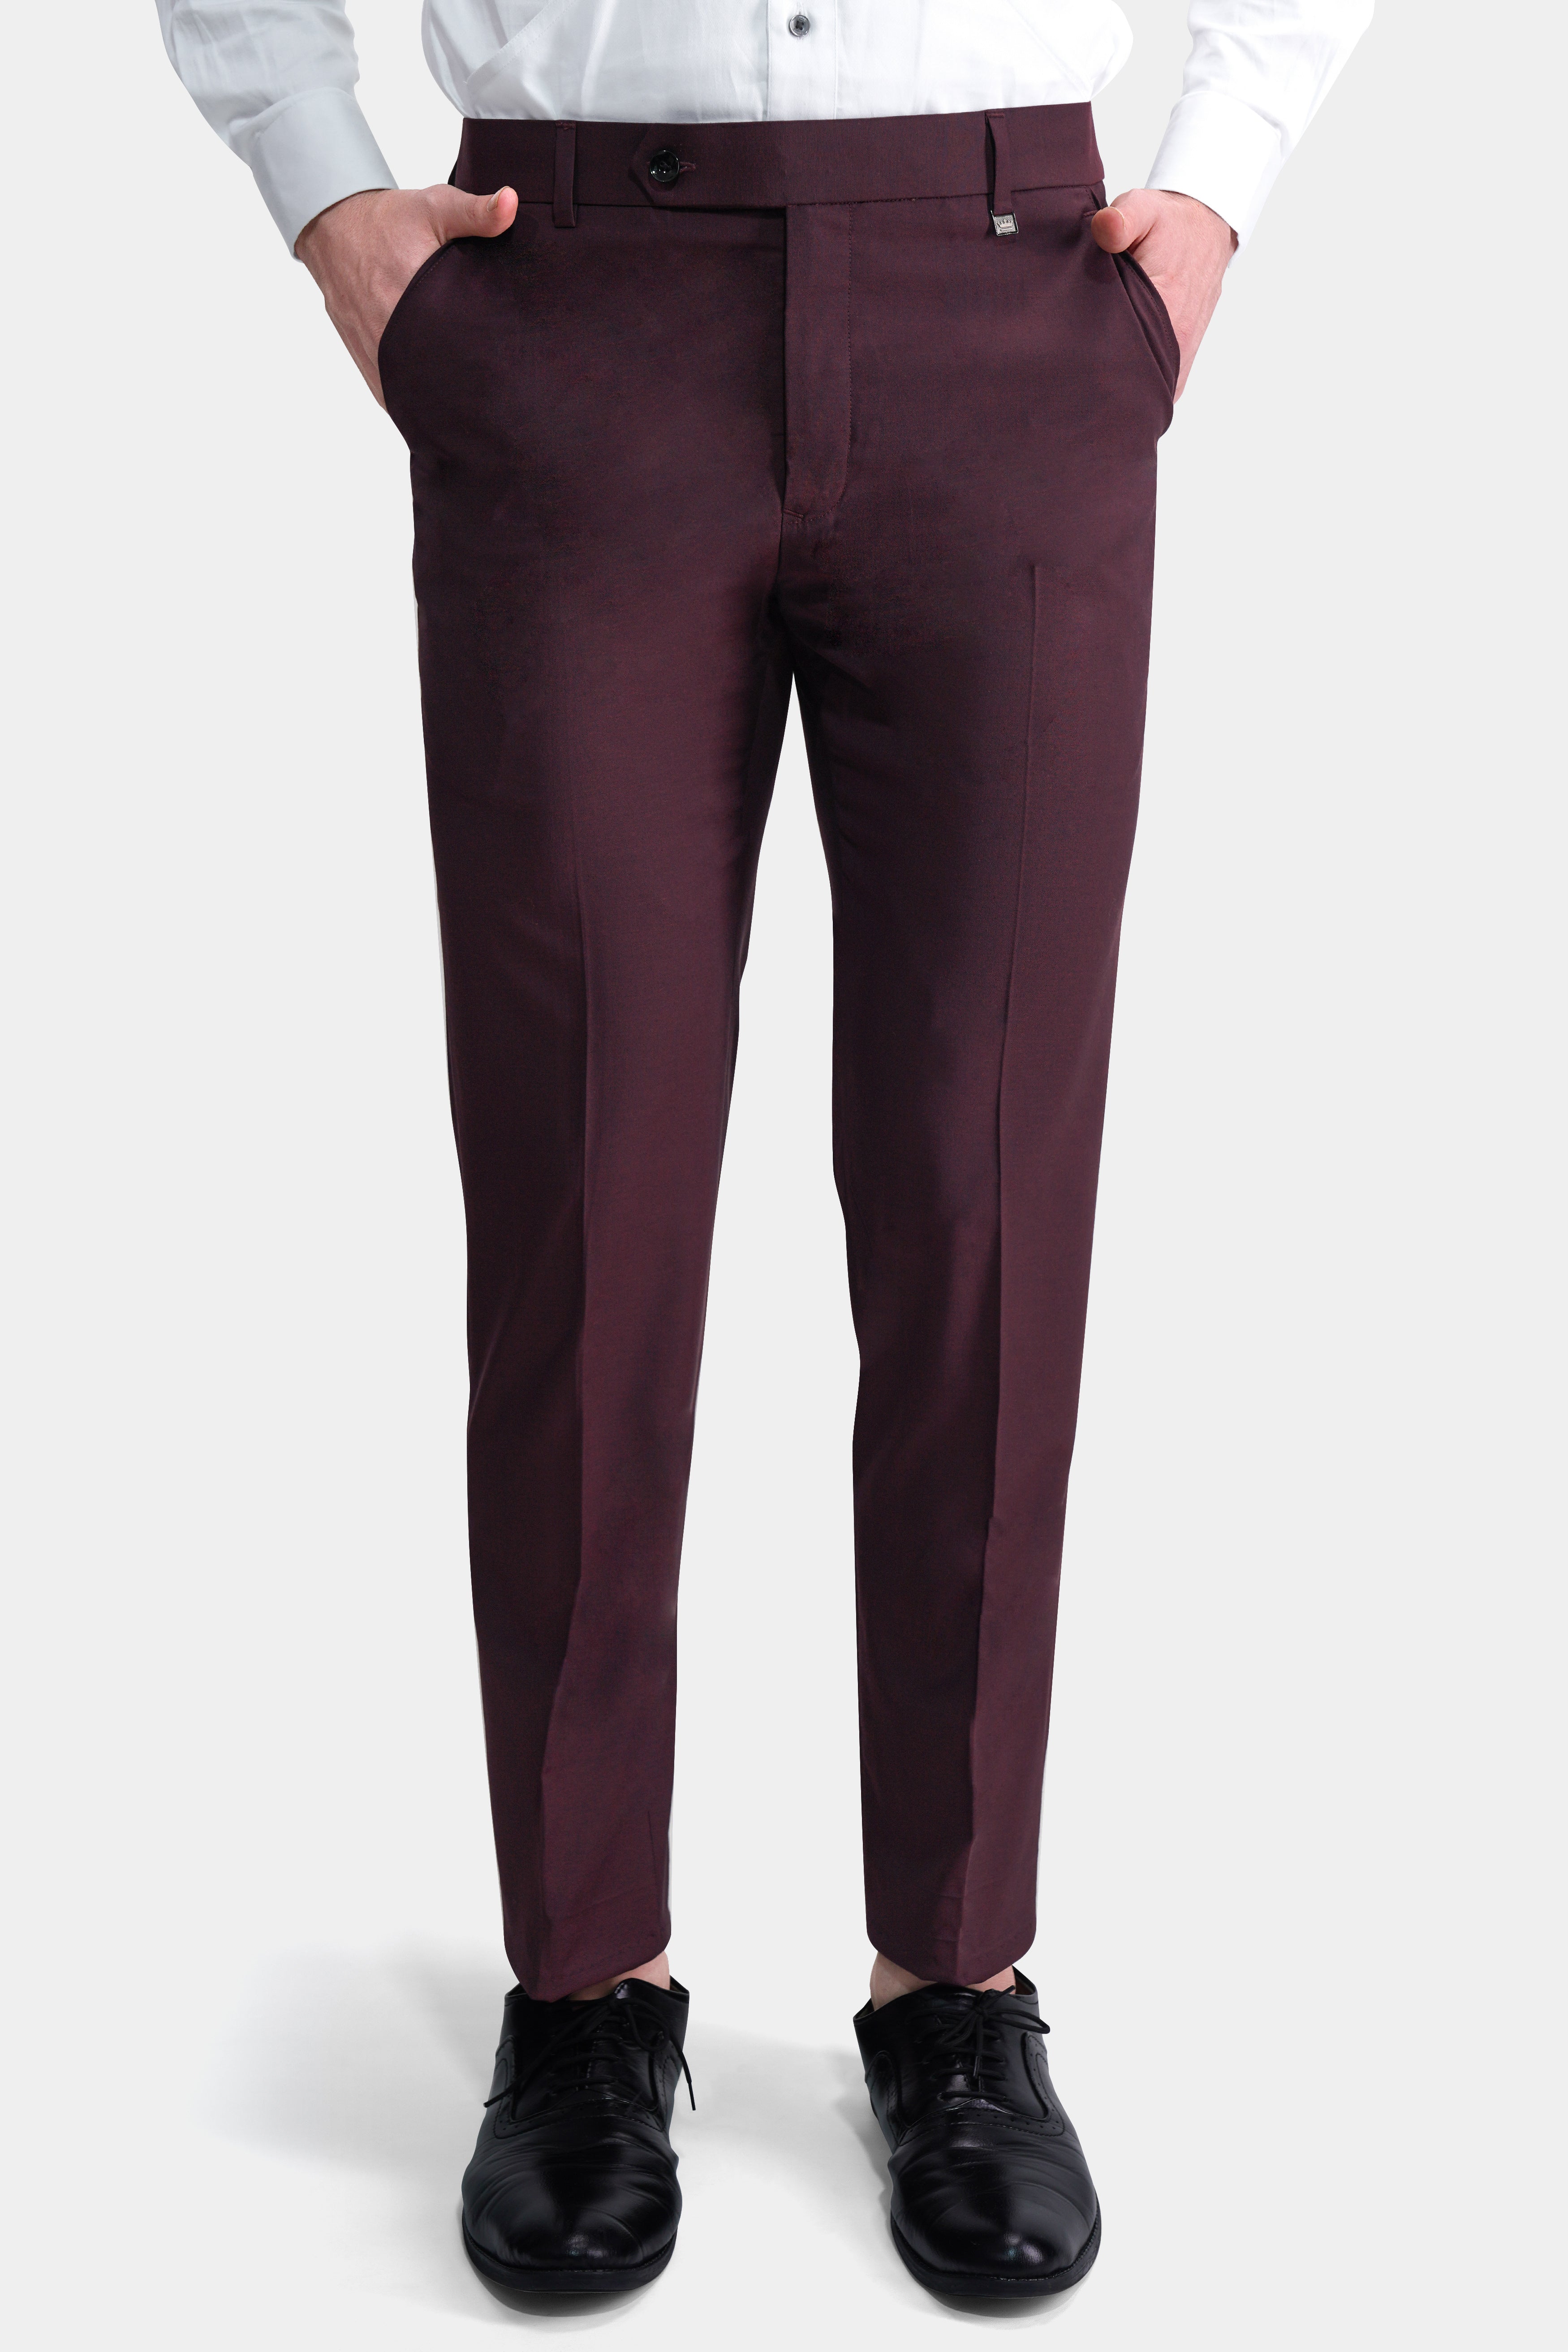 What Color Trousers To Wear With Burgundy Shoes: Visual Coordination Guide -